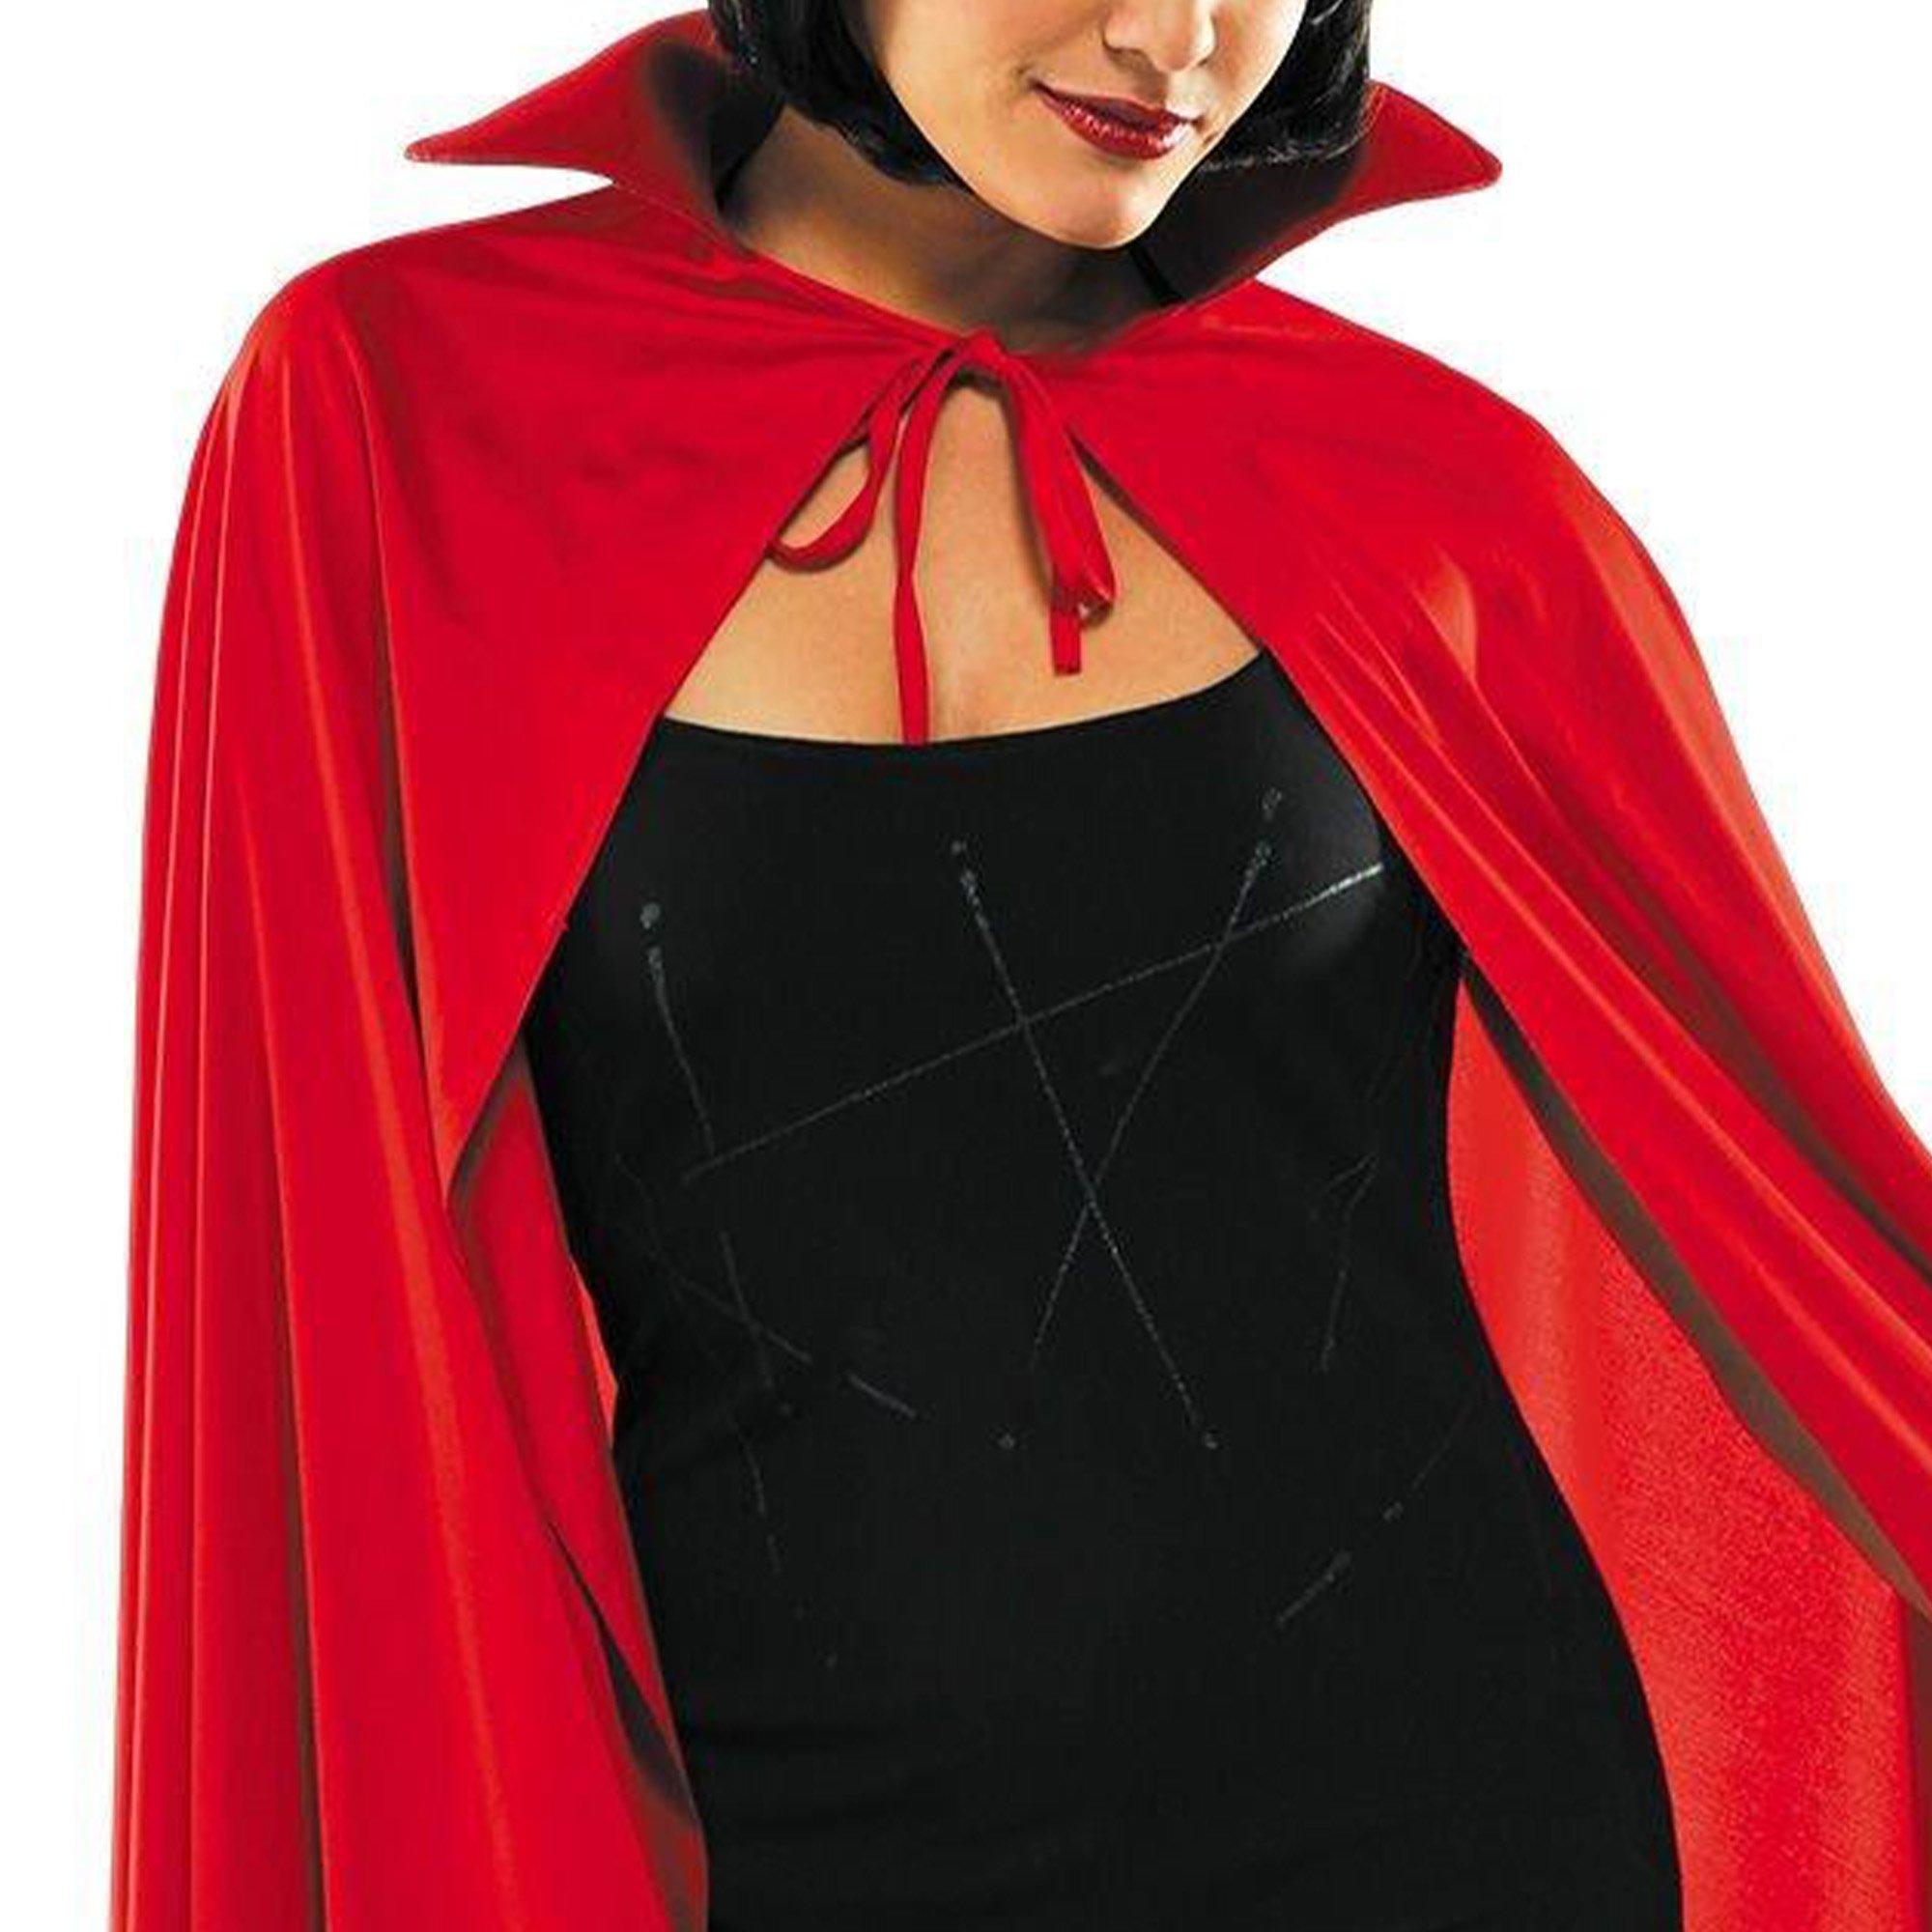 Adult Red Cape Deluxe